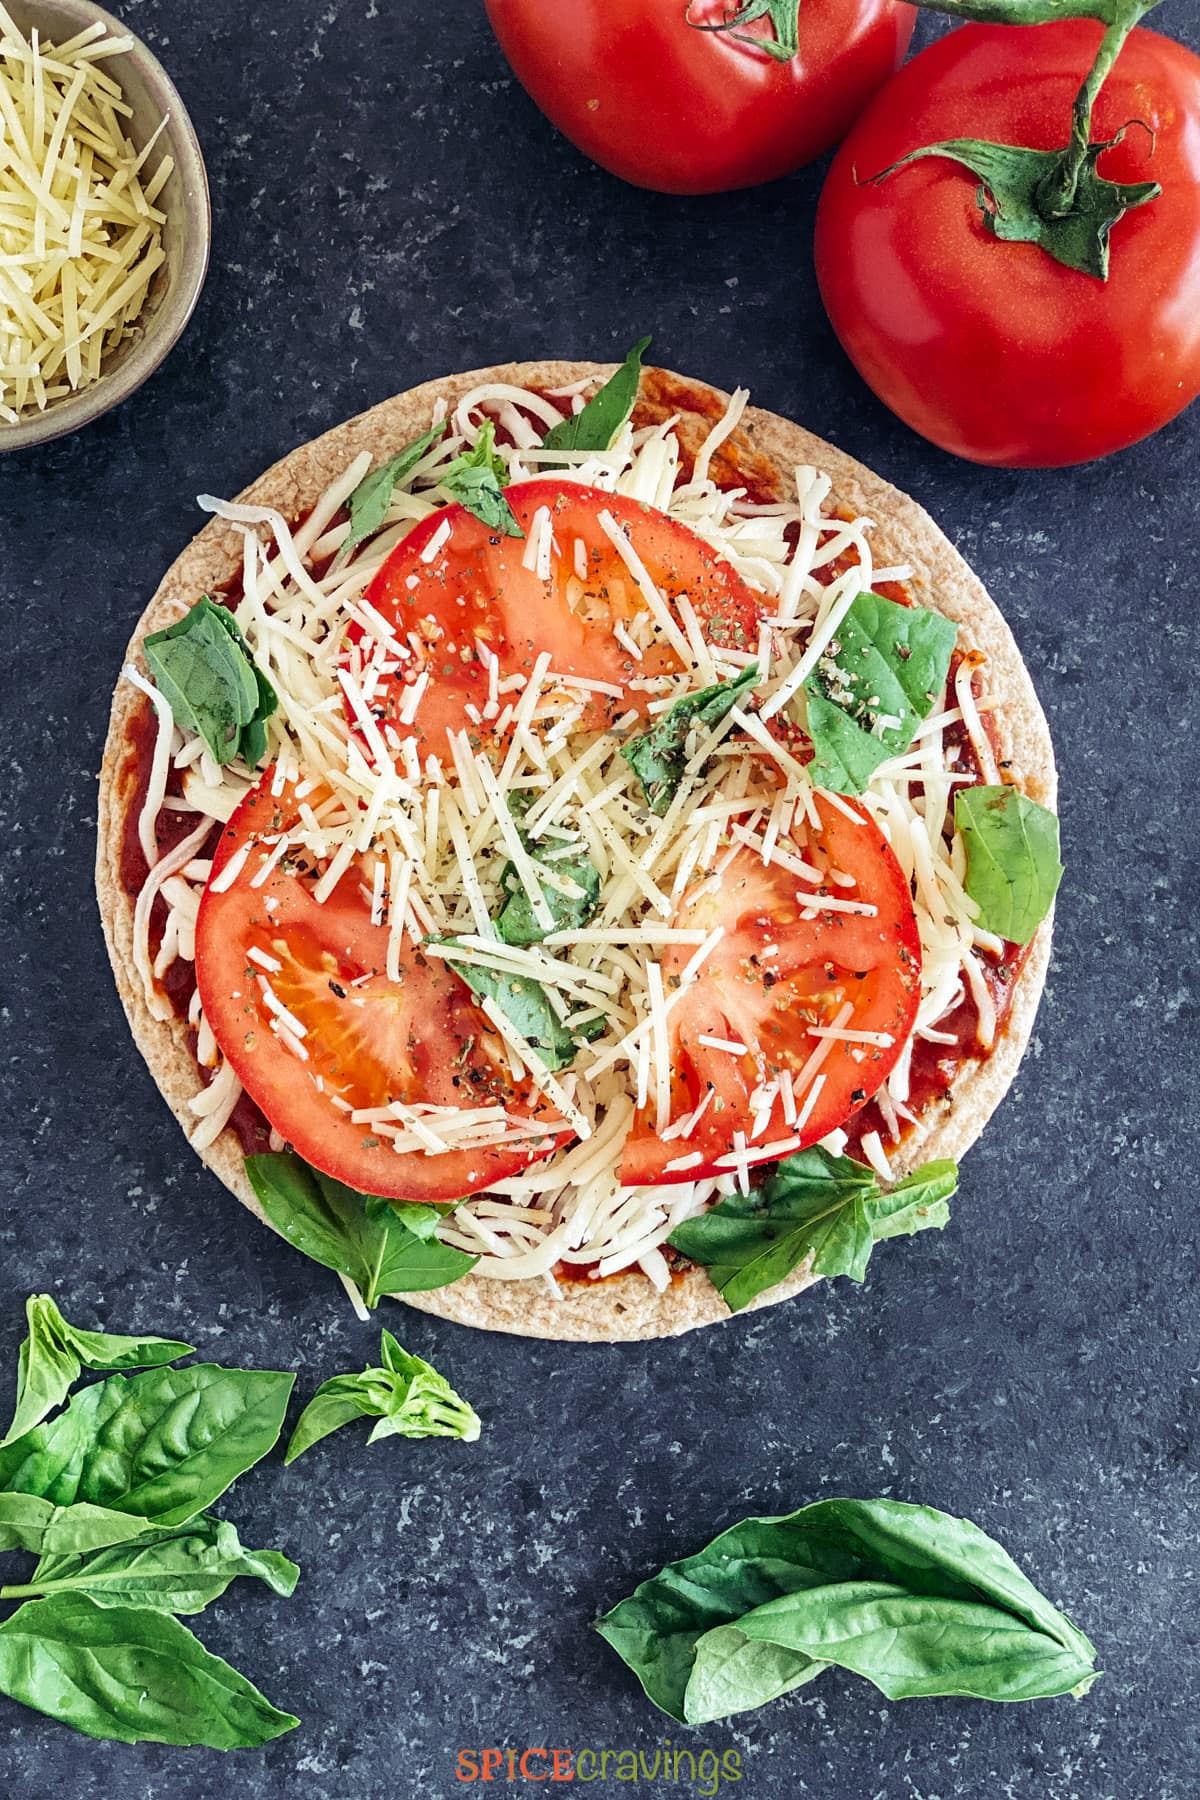 Assembled pizza with tomato, basil and cheese on flatbread